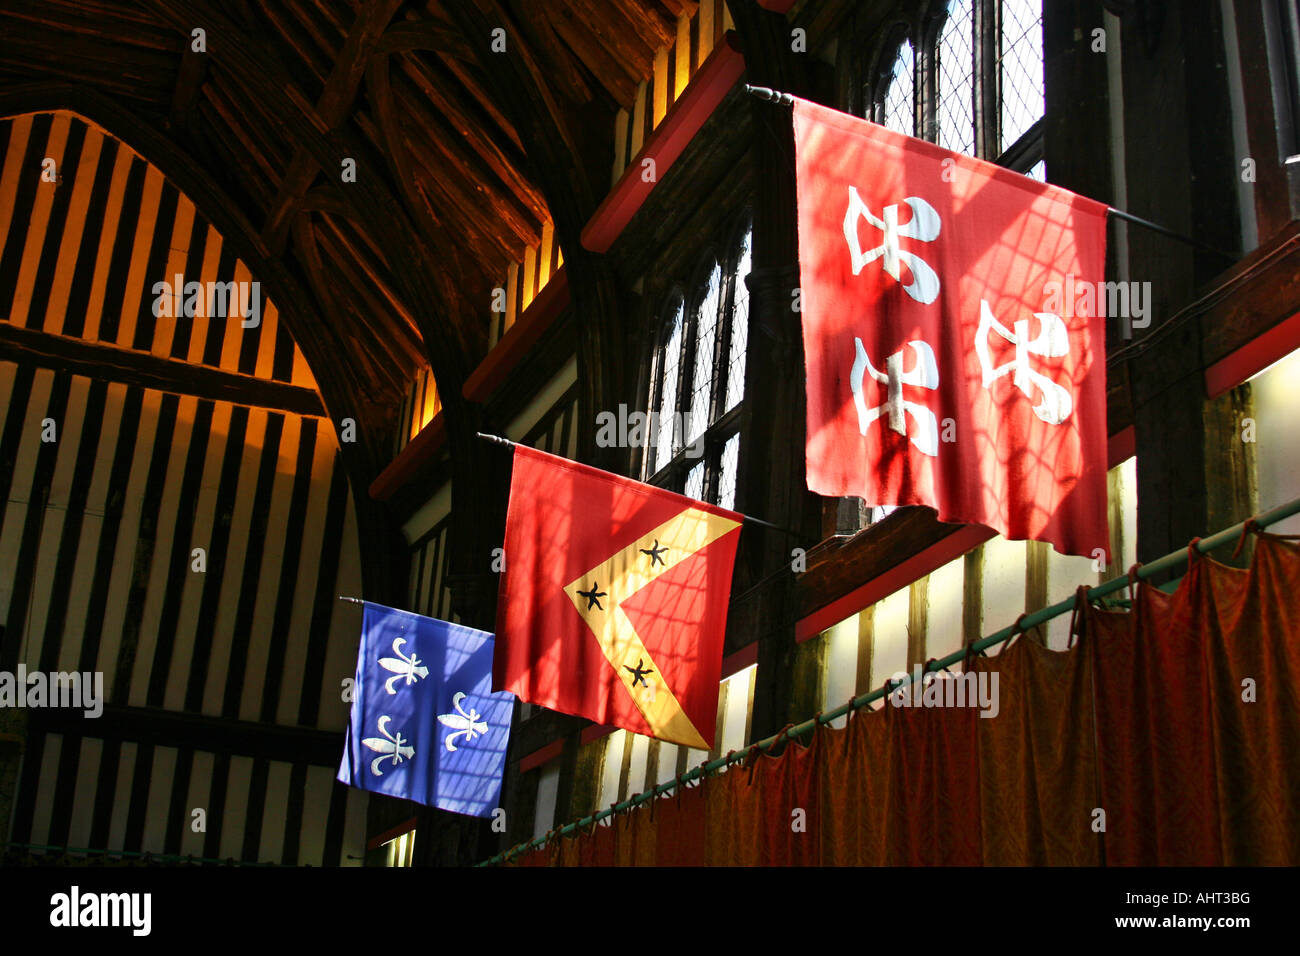 Flags and sunlit windows inside Gainsborough Old Hall. Stock Photo